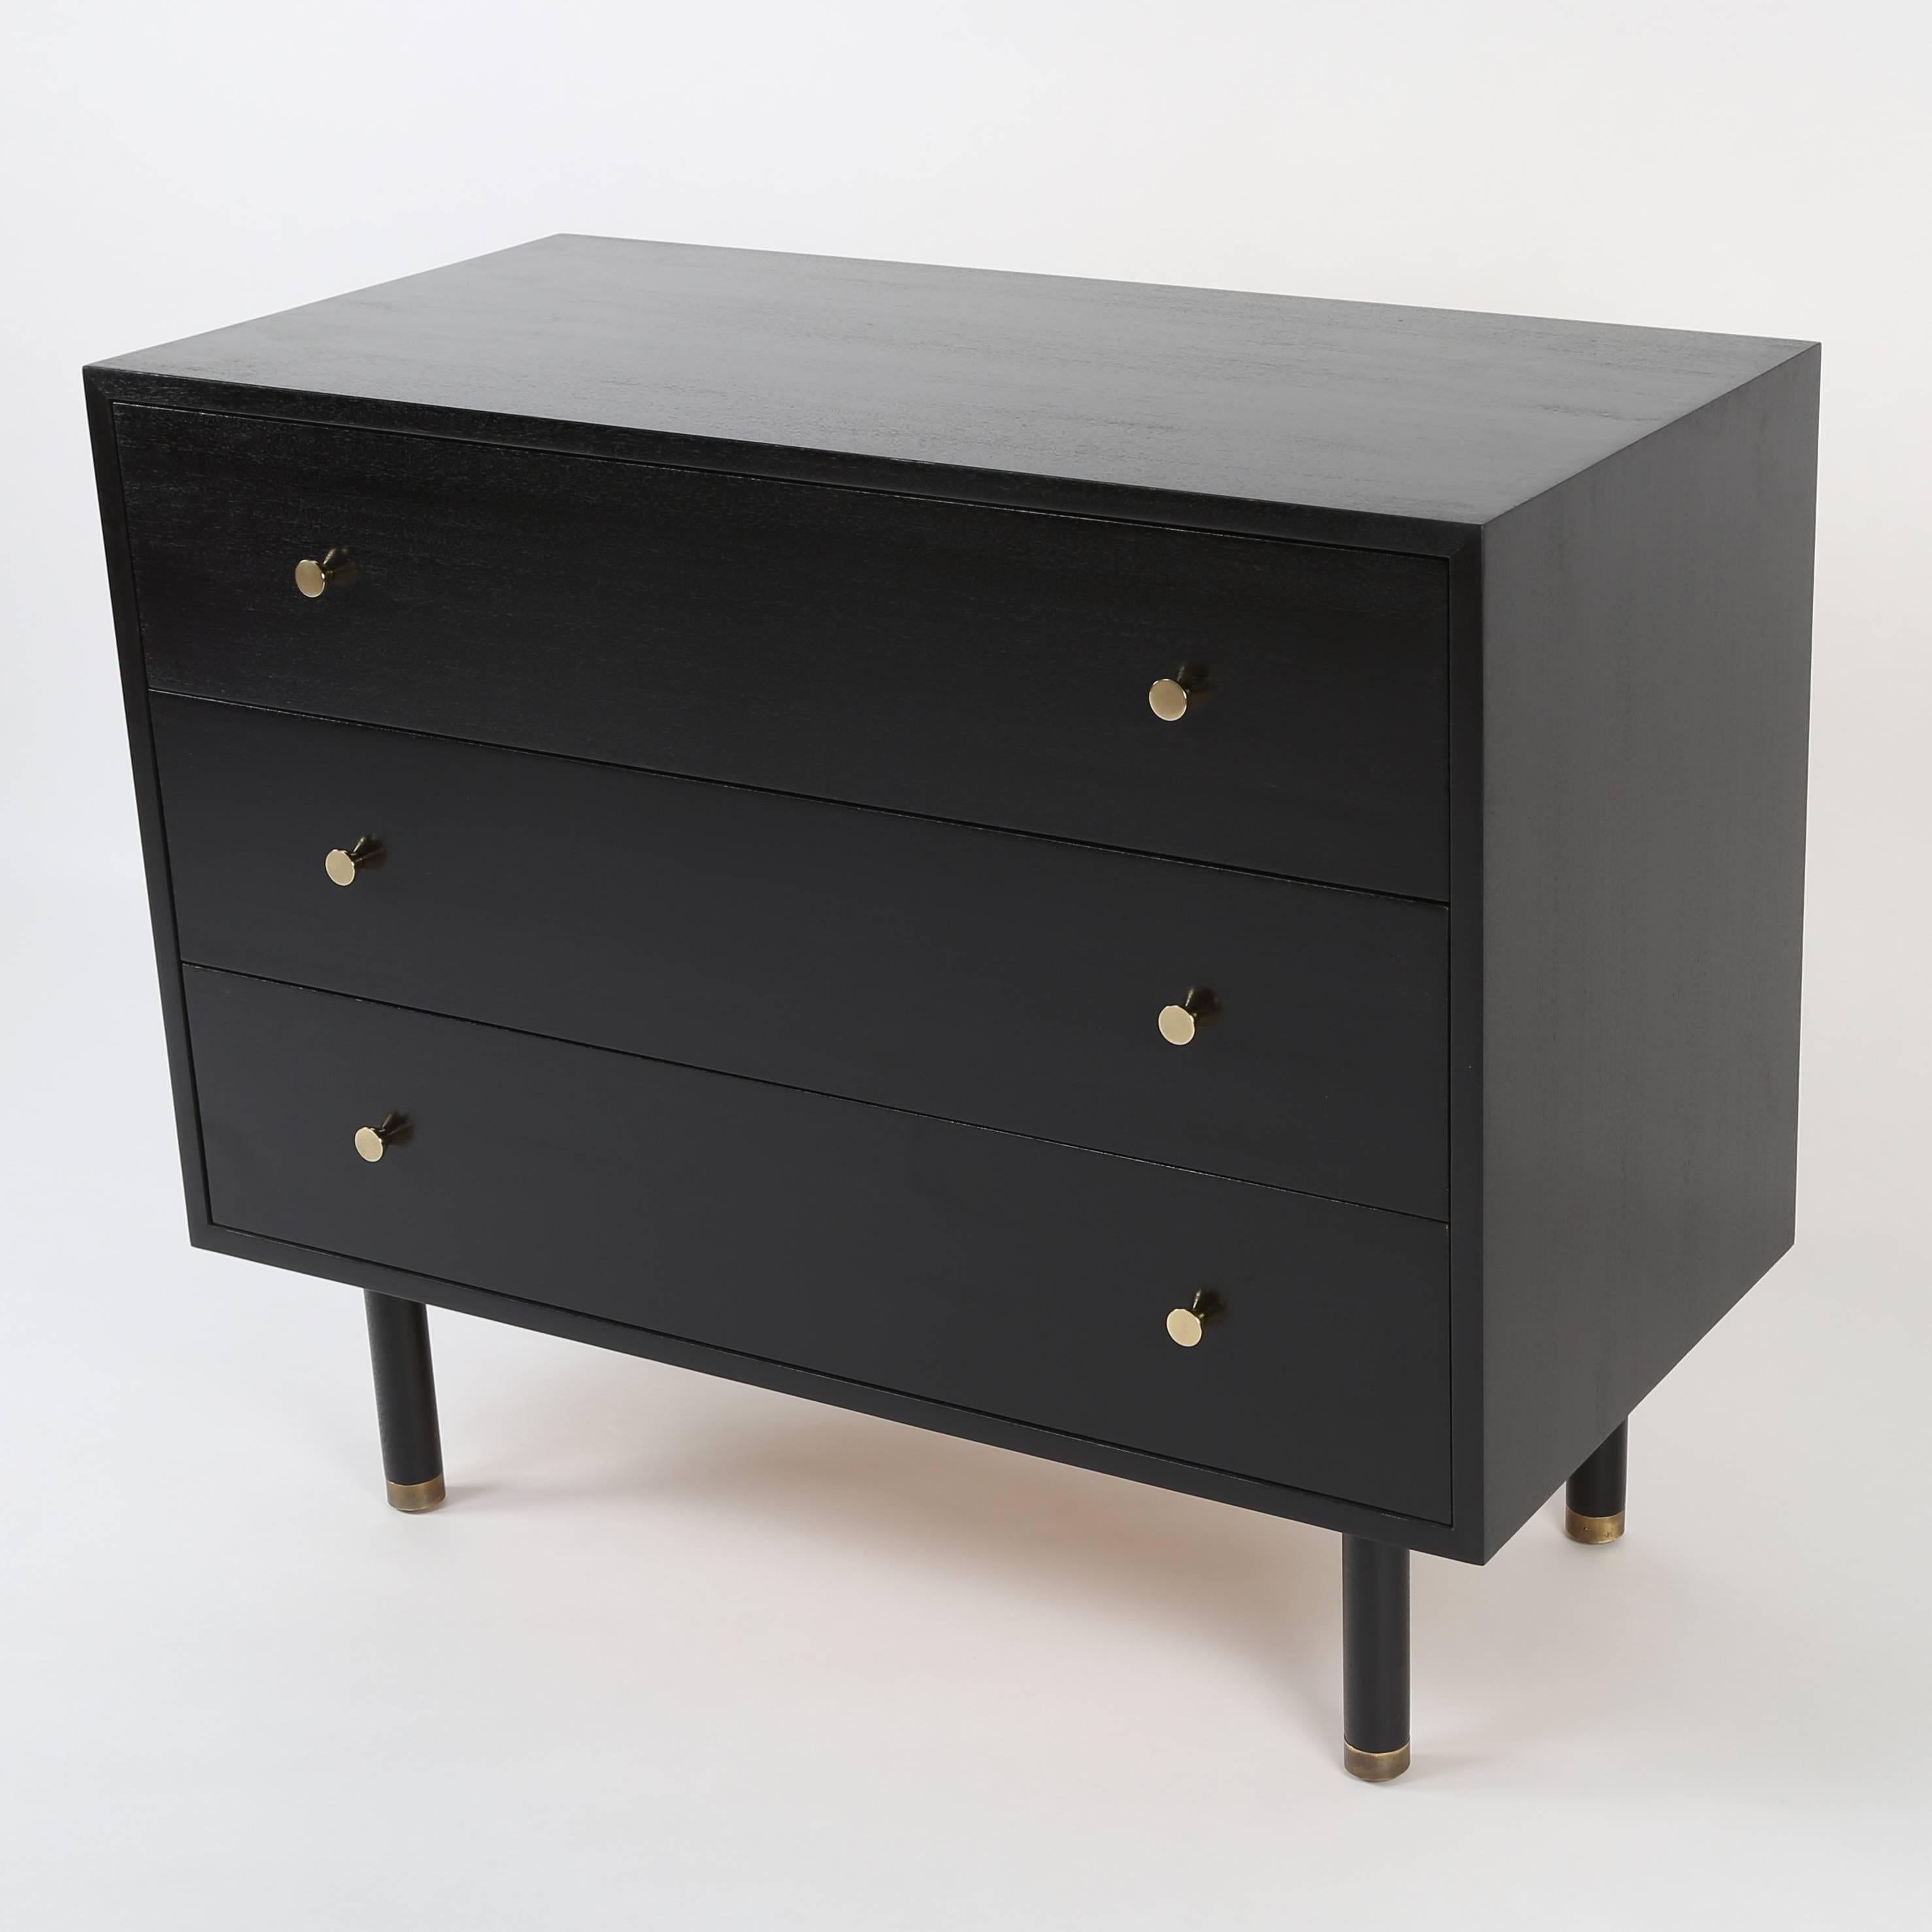 Three-drawer Harvey Probber chest in ebonized mahogany, resting on four circular legs with brass-capped feet, circa 1950s. Each drawer features two solid brass pulls. Top drawer has two removable dividers. Harvey Probber label on inside of top